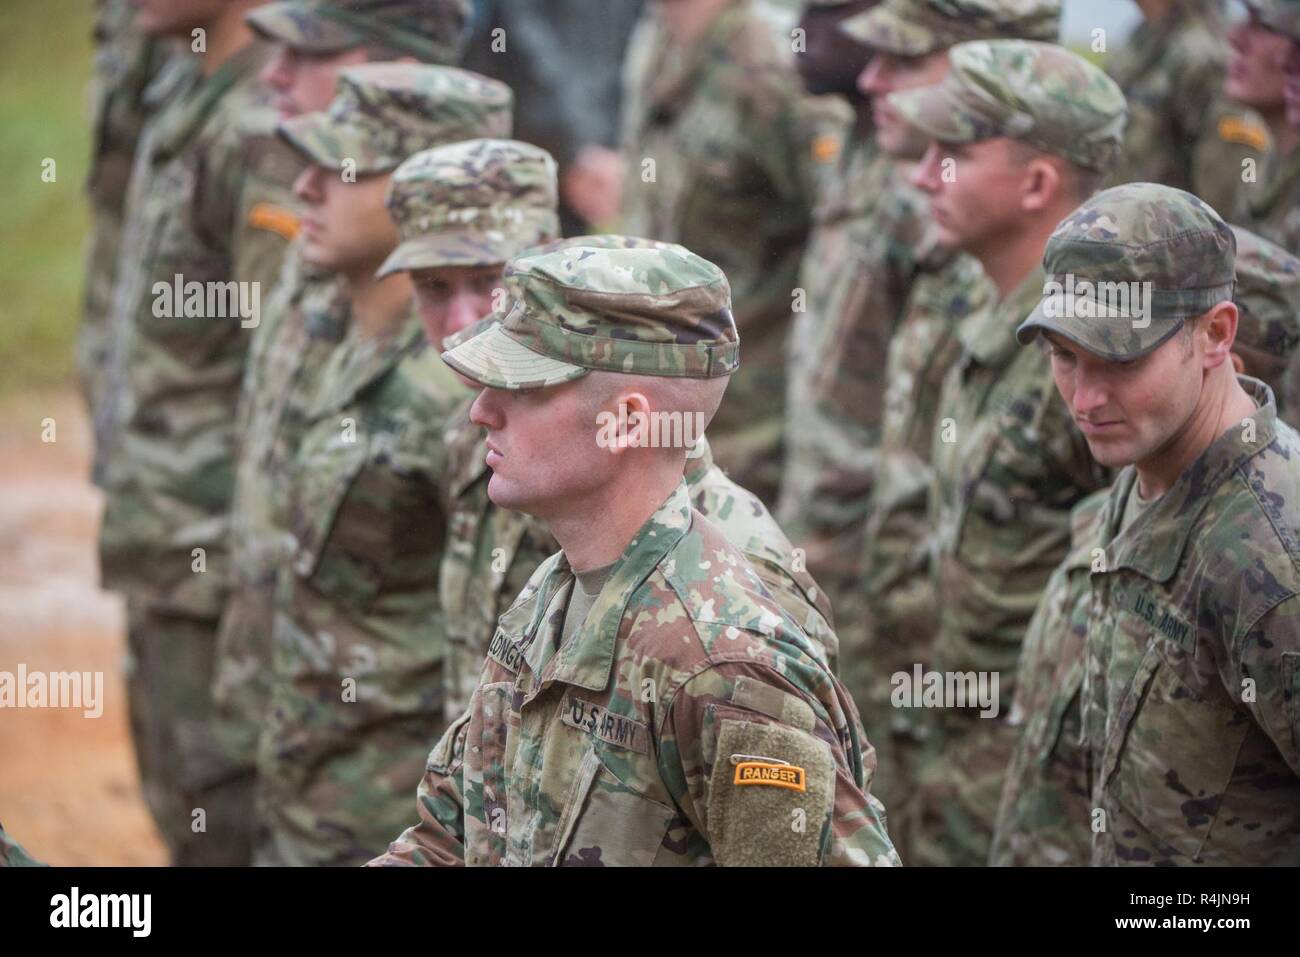 FORT BENNING, Ga. (Oct. 26, 2018) -- Under Secretary of the Army Ryan D. McCarthy speaks at the Airborne and Ranger Training Brigade ranger graduation at Victory Pond at Fort Benning, Georgia, Oct. 26. McCarthy, who served five years in the Army, was involved in combat operations in Afghanistan in support of Operation Enduring Freedom with the 75th Ranger Regiment, U.S. Special Operations Command. Stock Photo